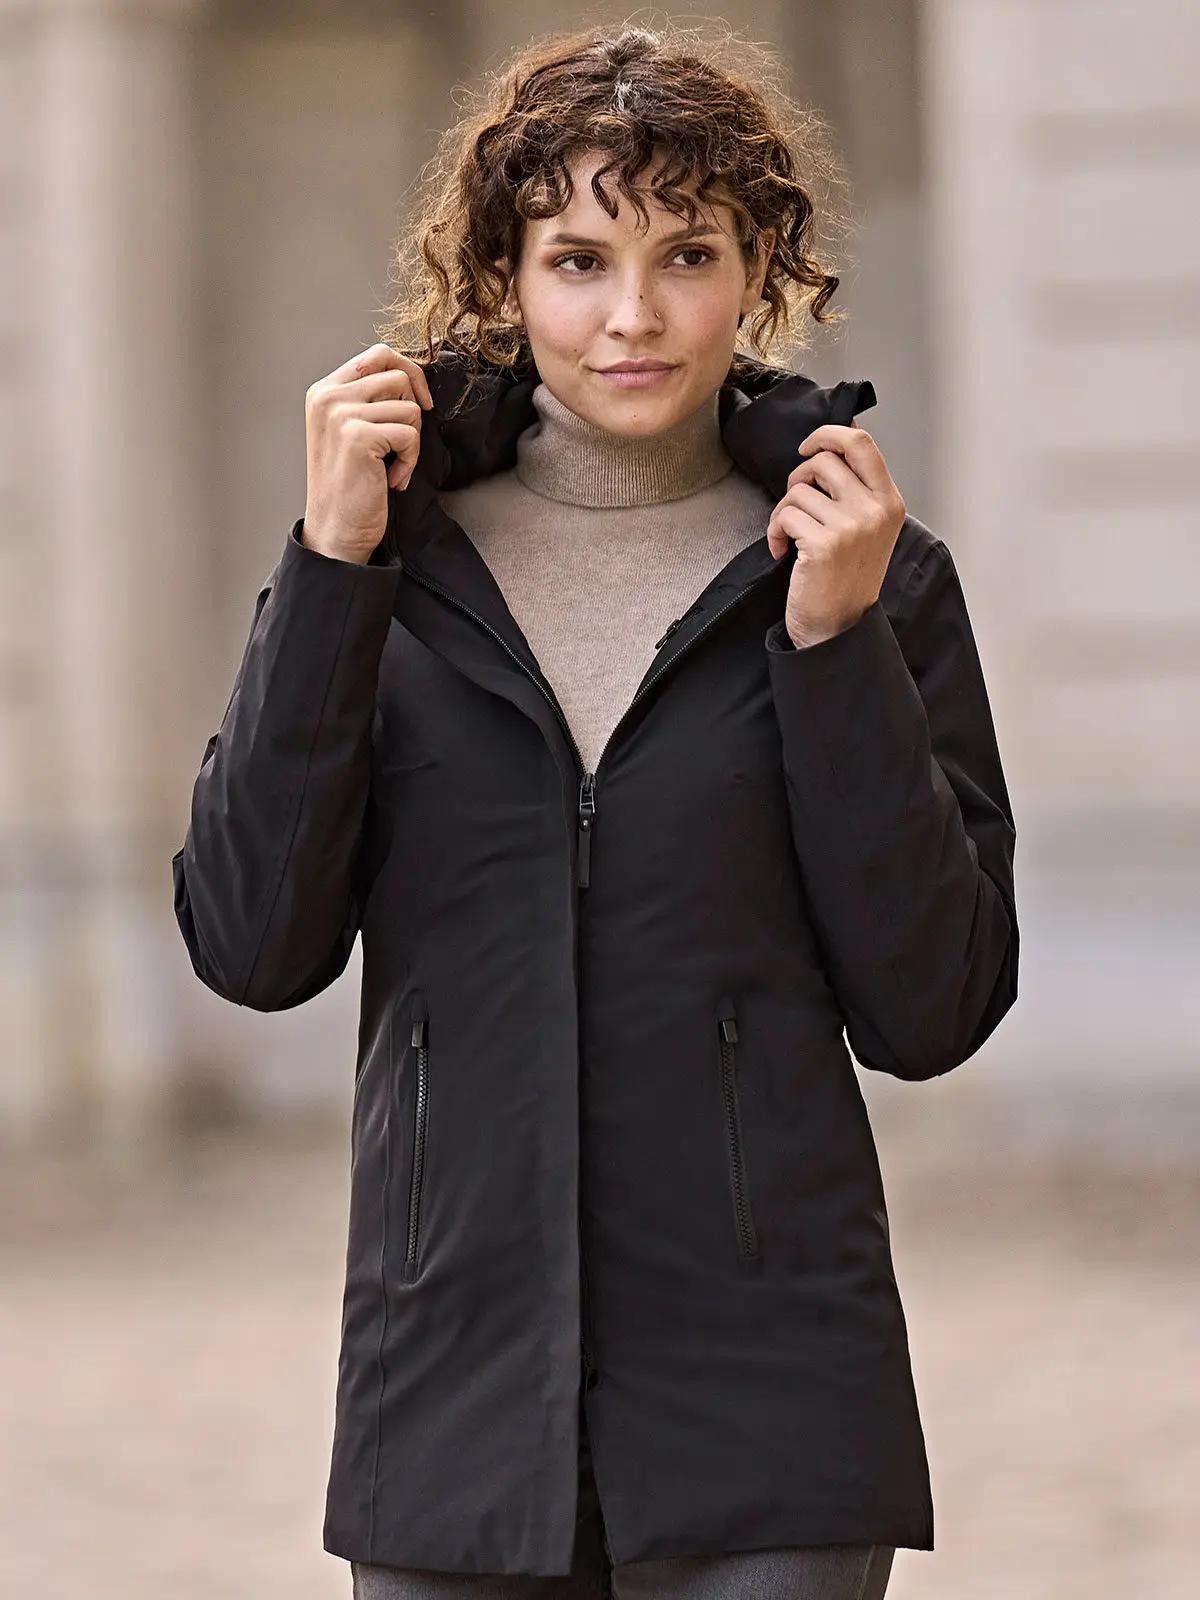 Ladies All Weather Parka